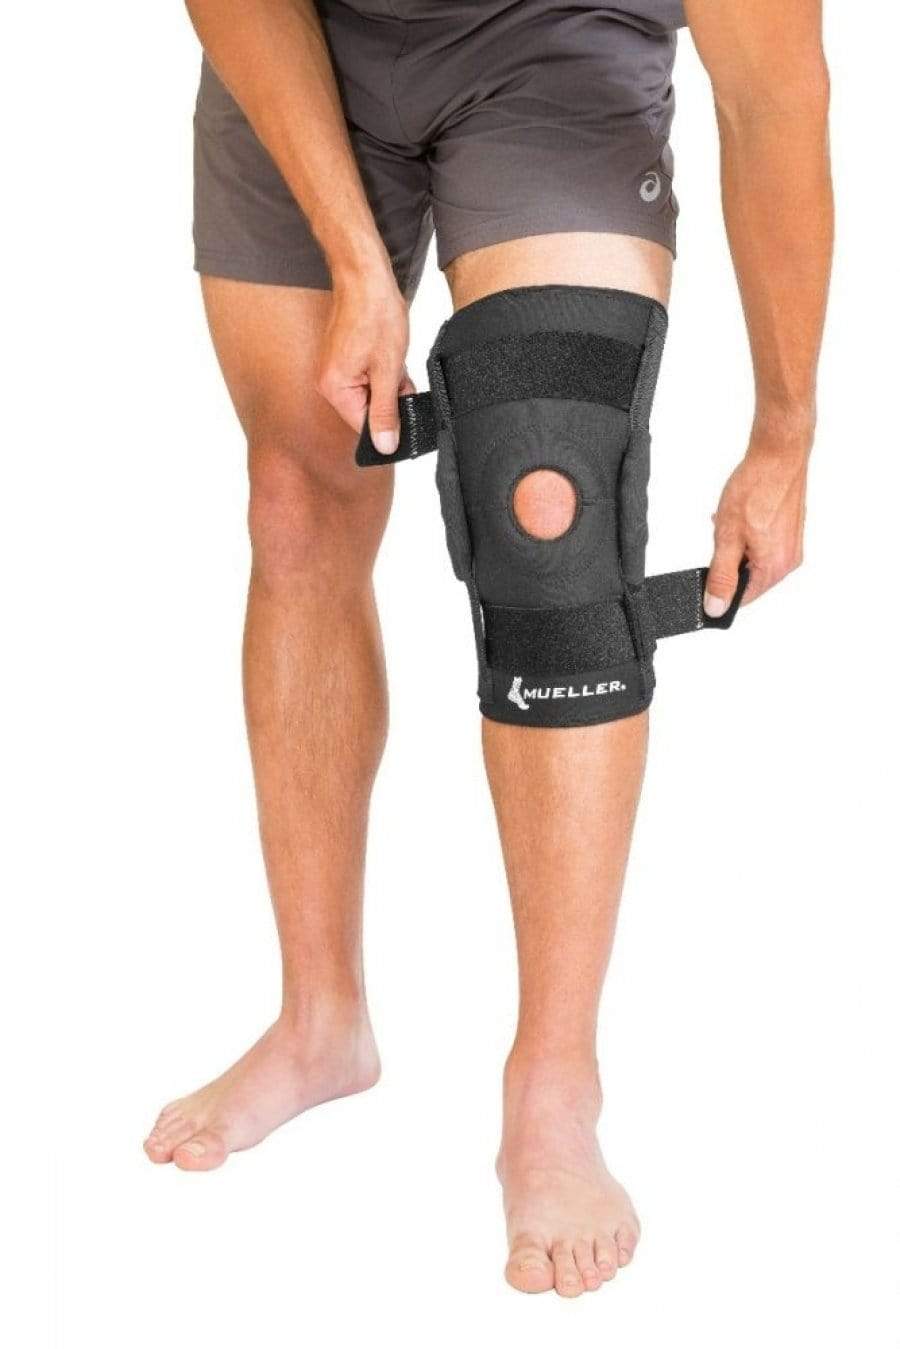 MUE5313 METAL TRIAXIAL HINGED WRAPAROUND KNEE BRACE WITH OPEN BACK TO PREVENT BUNCHING